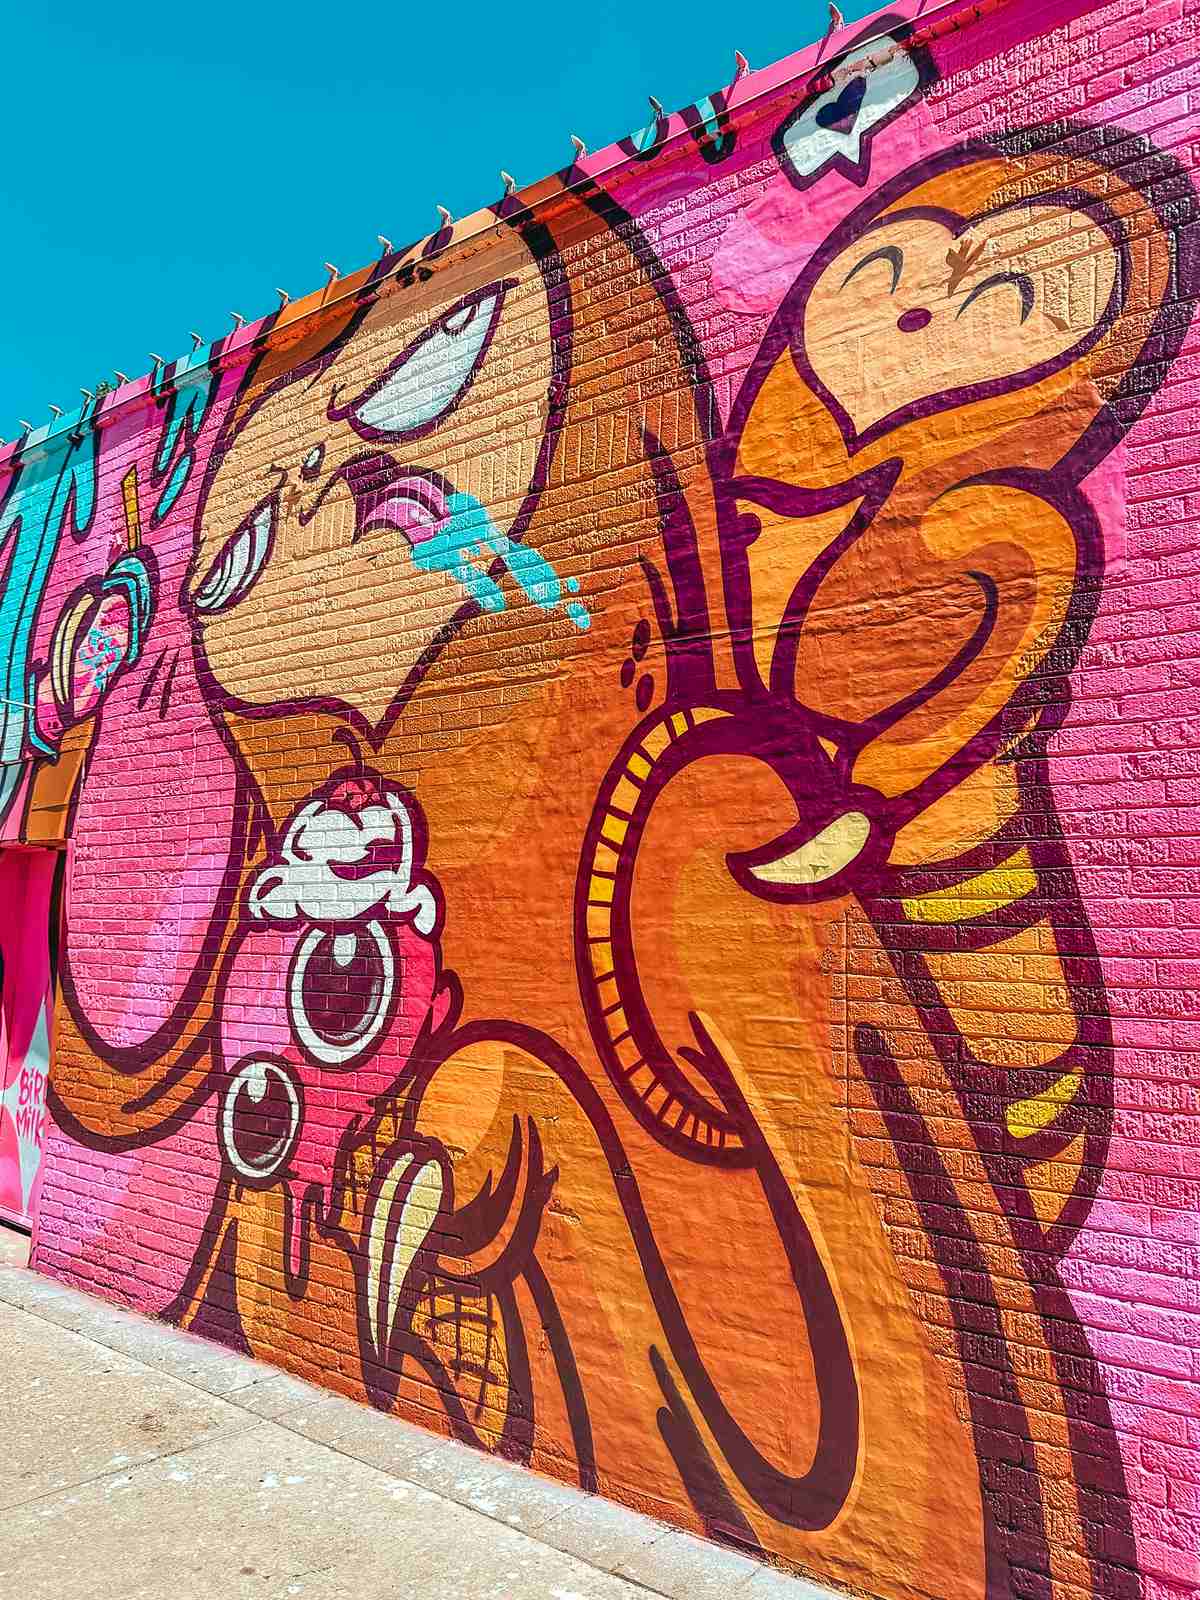 Sloth mural in the Plaza District in Oklahoma City